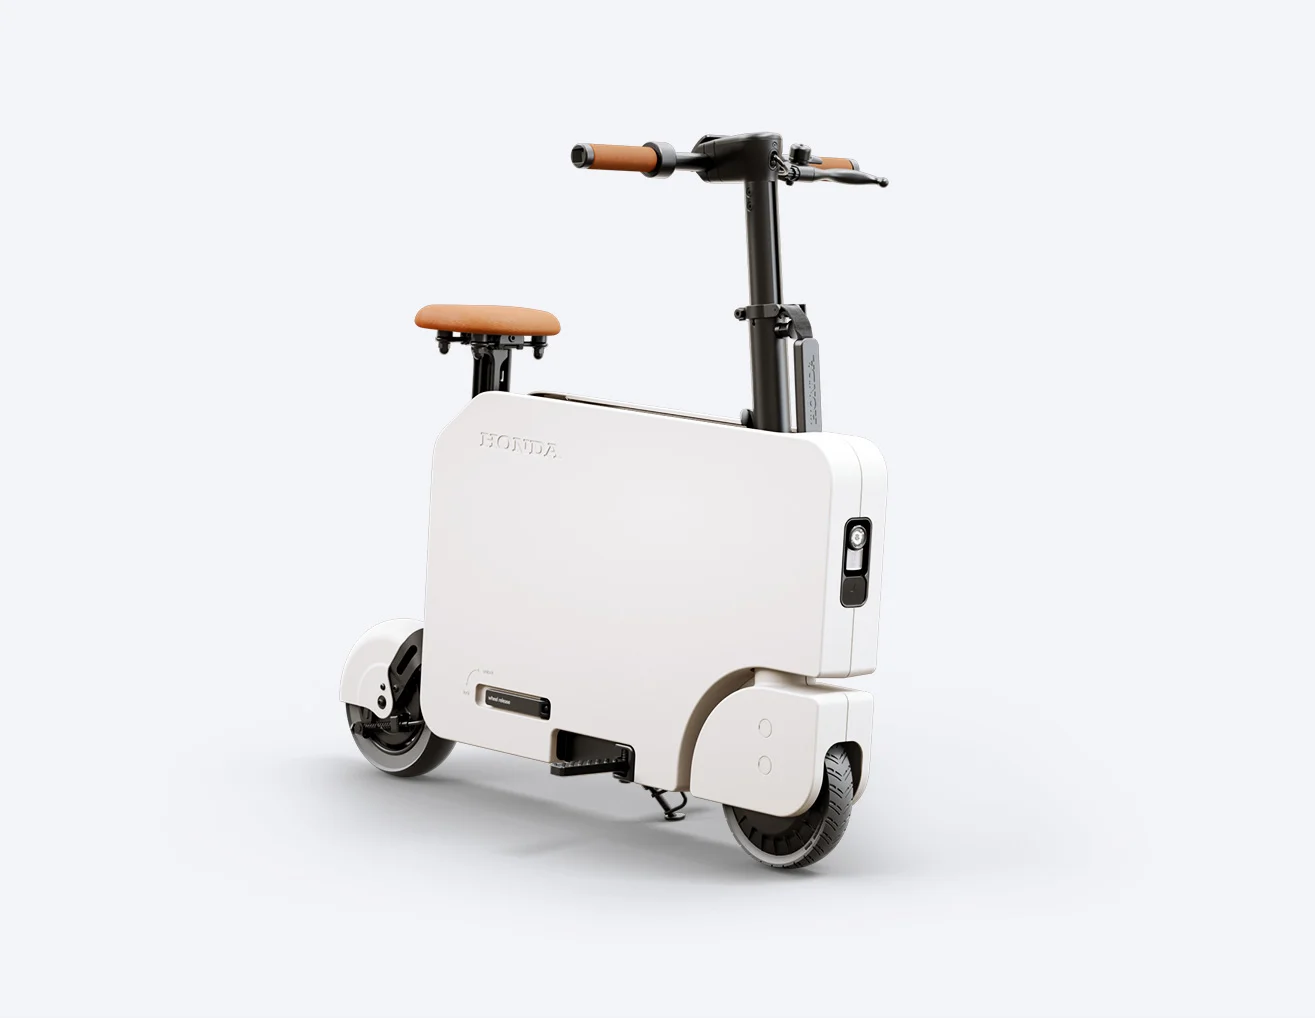 Honda Motocompacto Electric Scooter: A Folding Briefcase-Sized Electric Scooter